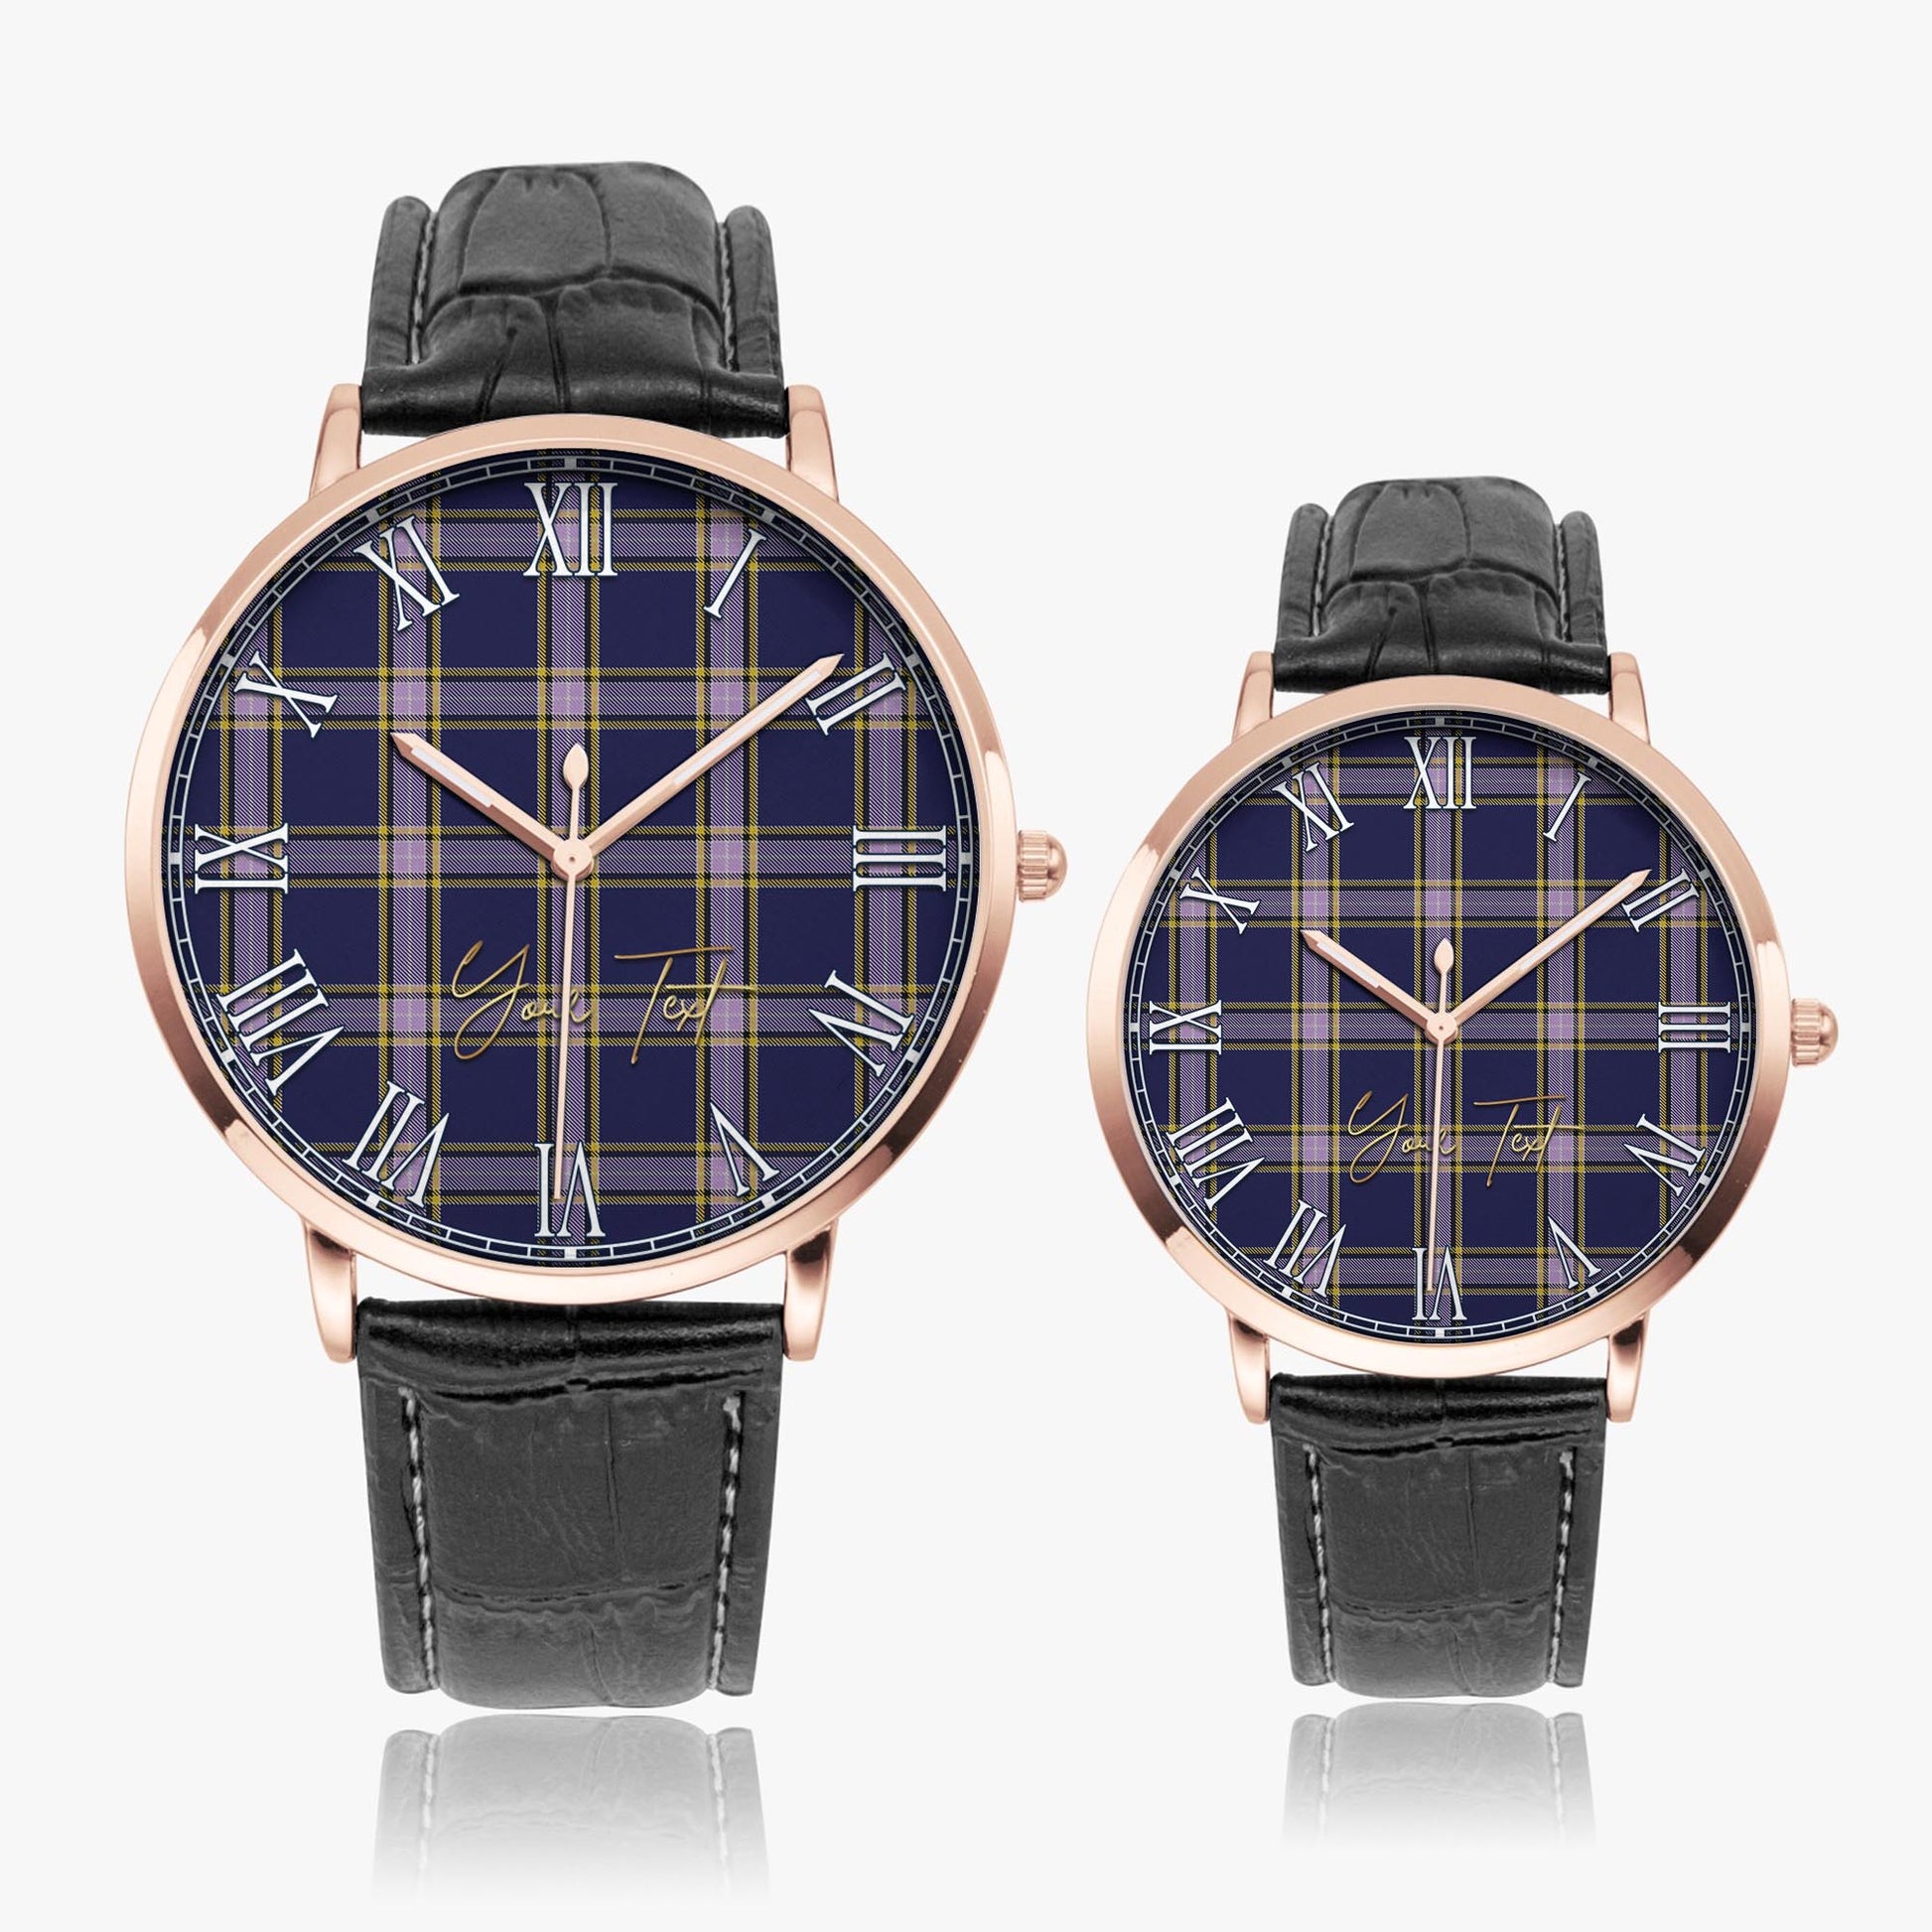 Nunavut Territory Canada Tartan Personalized Your Text Leather Trap Quartz Watch Ultra Thin Rose Gold Case With Black Leather Strap - Tartanvibesclothing